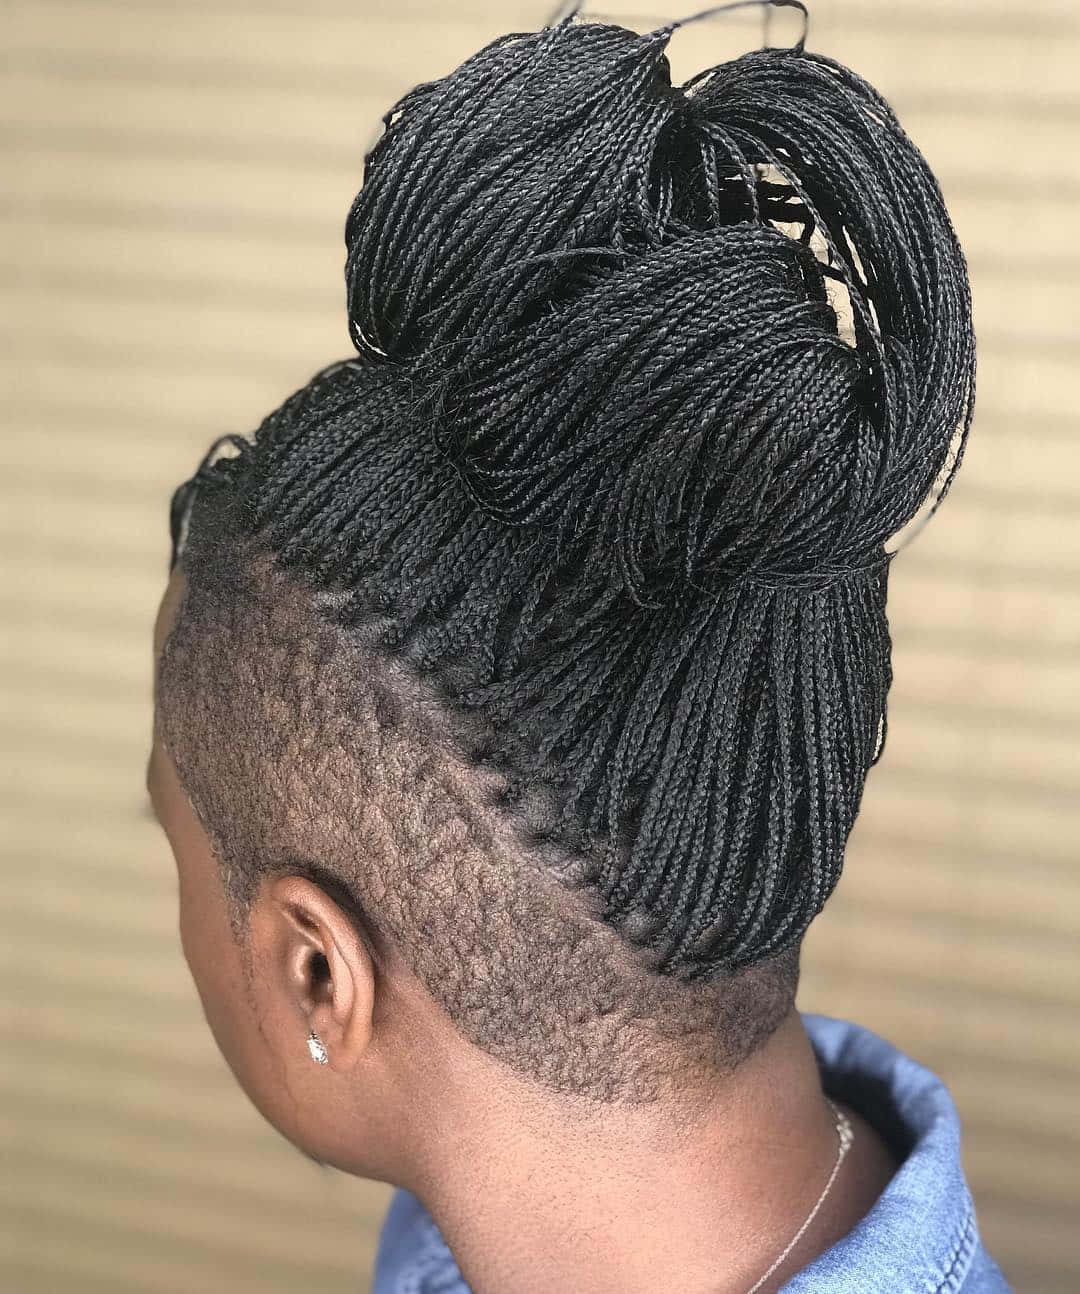 A Woman With Braids In Her Hair